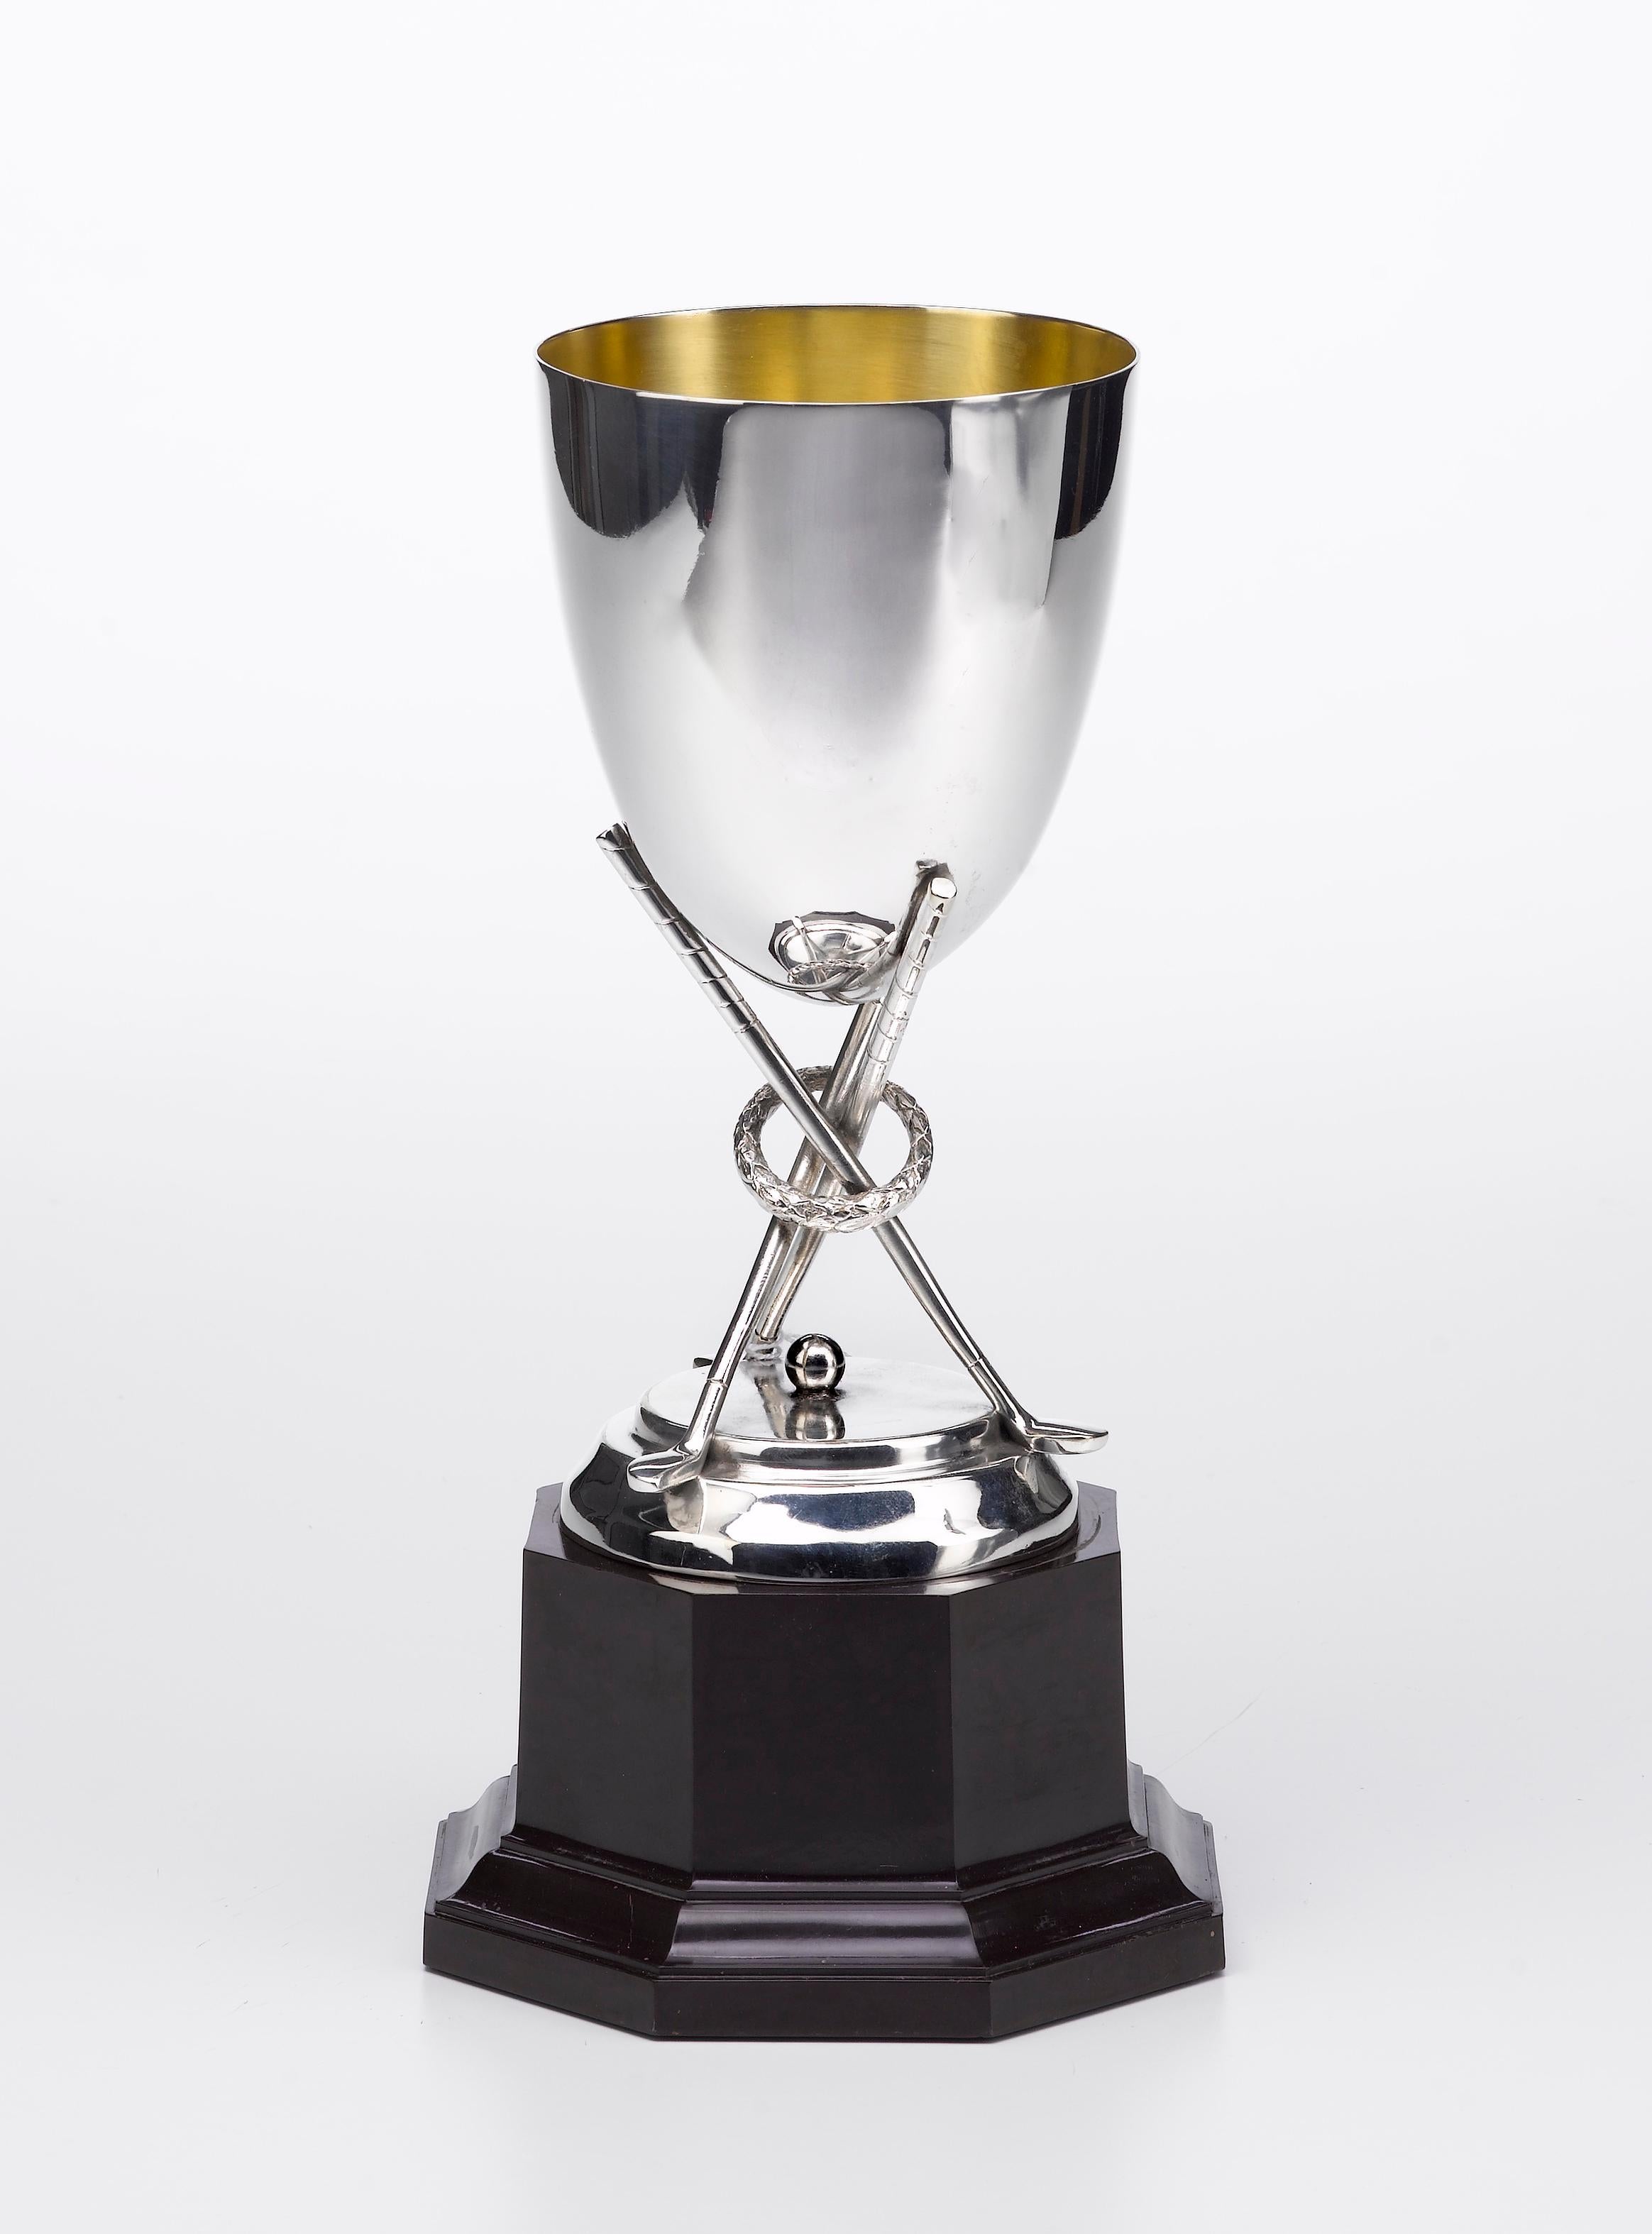 Offered is a unique, antique silver golf trophy. This sterling silver trophy was designed during the 19th century as an award for the winner of a golf competition. The trophy includes a large chalice resting on top of three golf clubs. The golf